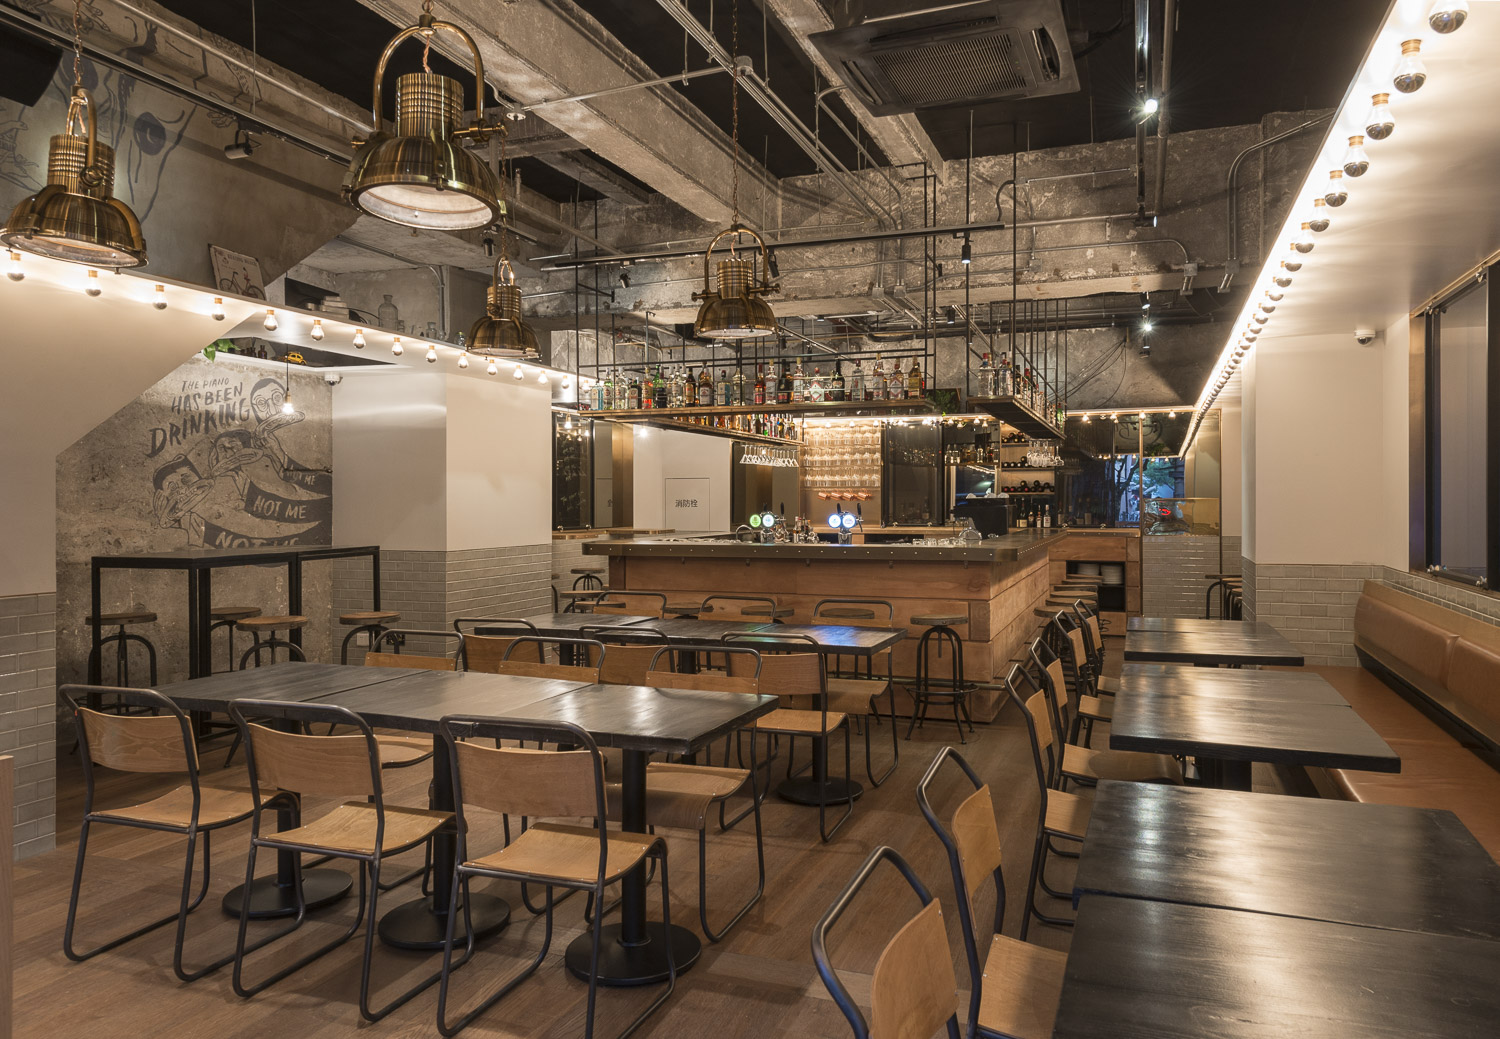 Factory Food: 7 Restaurants Serving Up an Industrial Aesthetic